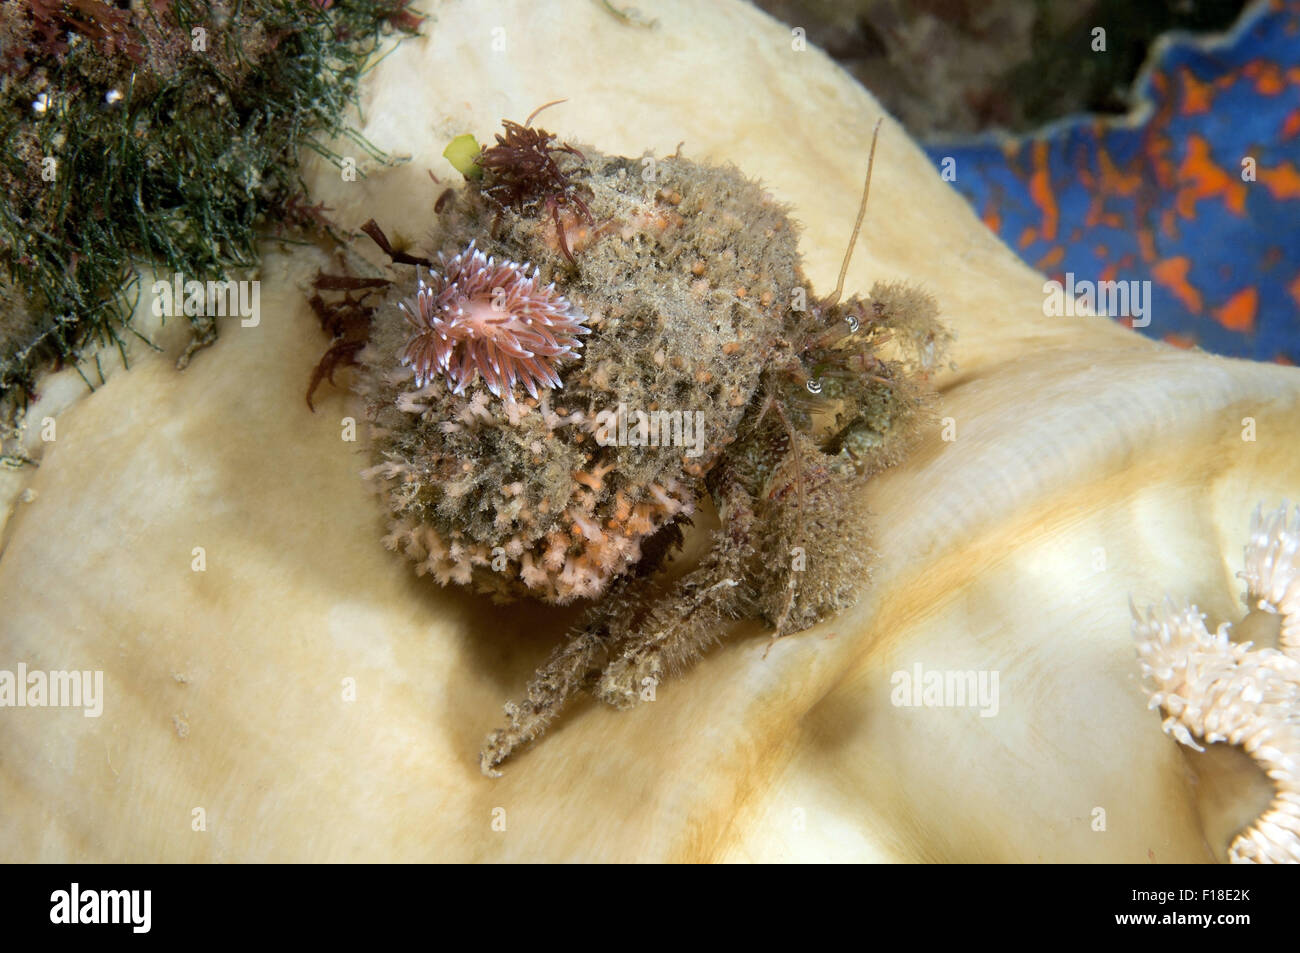 Oct. 15, 2014 - Sea Of Japan, Primorye, Far East, Russia - Nudibranch or Sea Slug  (Cuthona nana ), This kind of nudibranchs - found only in hermit crabs ( Pagurus sp. ). Sea of Japan, Rudnaya Pristan, Far East, Primorsky Krai, Russia (Credit Image: © Andrey Nekrasov/ZUMA Wire/ZUMAPRESS.com) Stock Photo